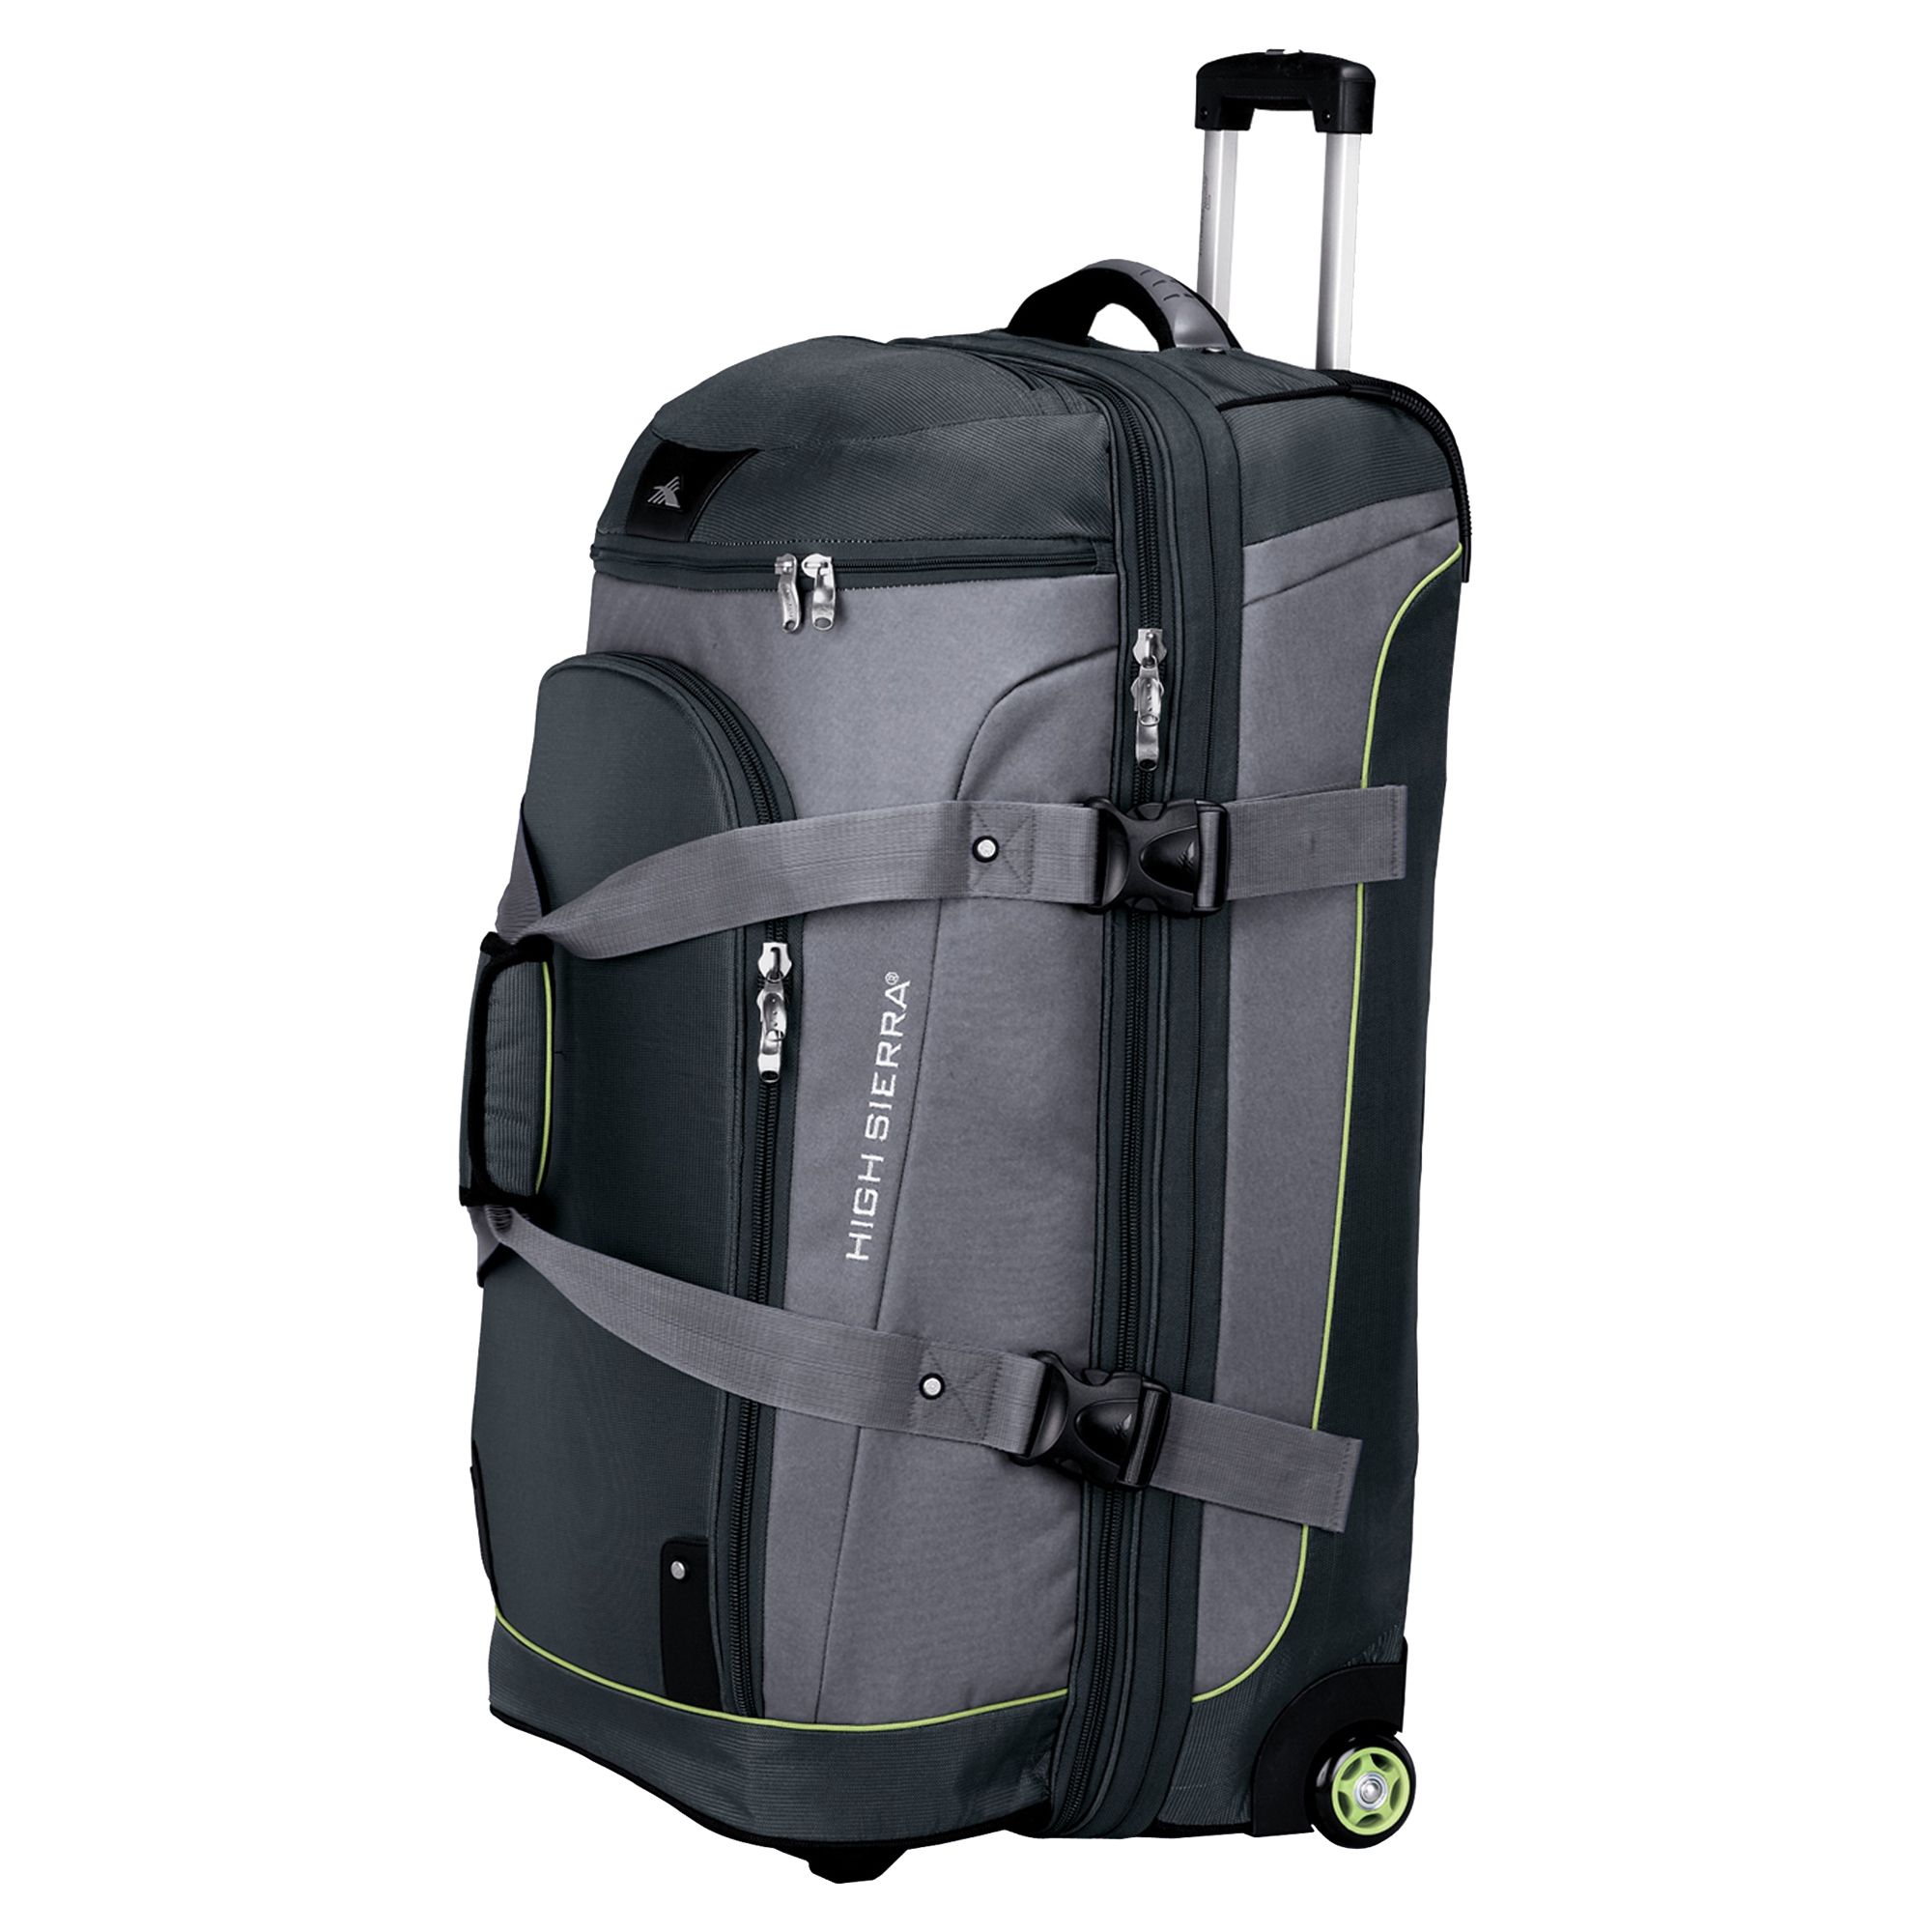 High Sierra 32 inch Wheeled Duffel Bag: Travel in Style Thanks to Sears